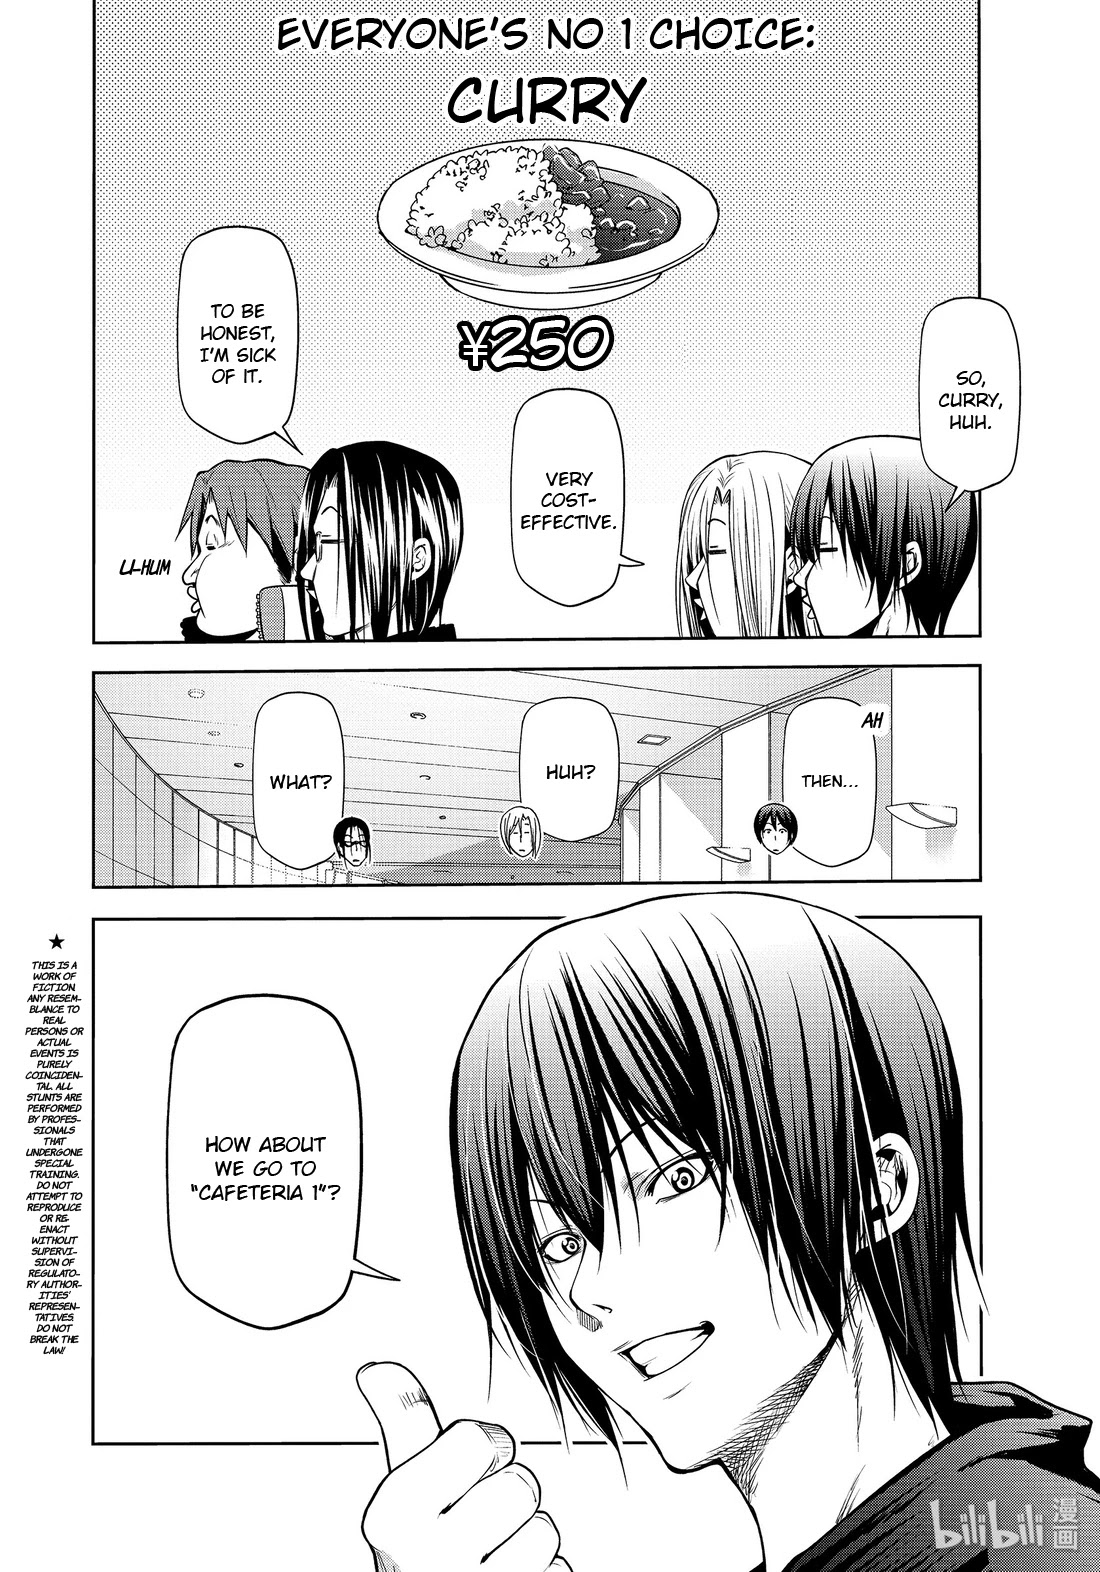 Grand Blue Dreaming, Chapter 62.5: Cafeteria 1 - English Scans